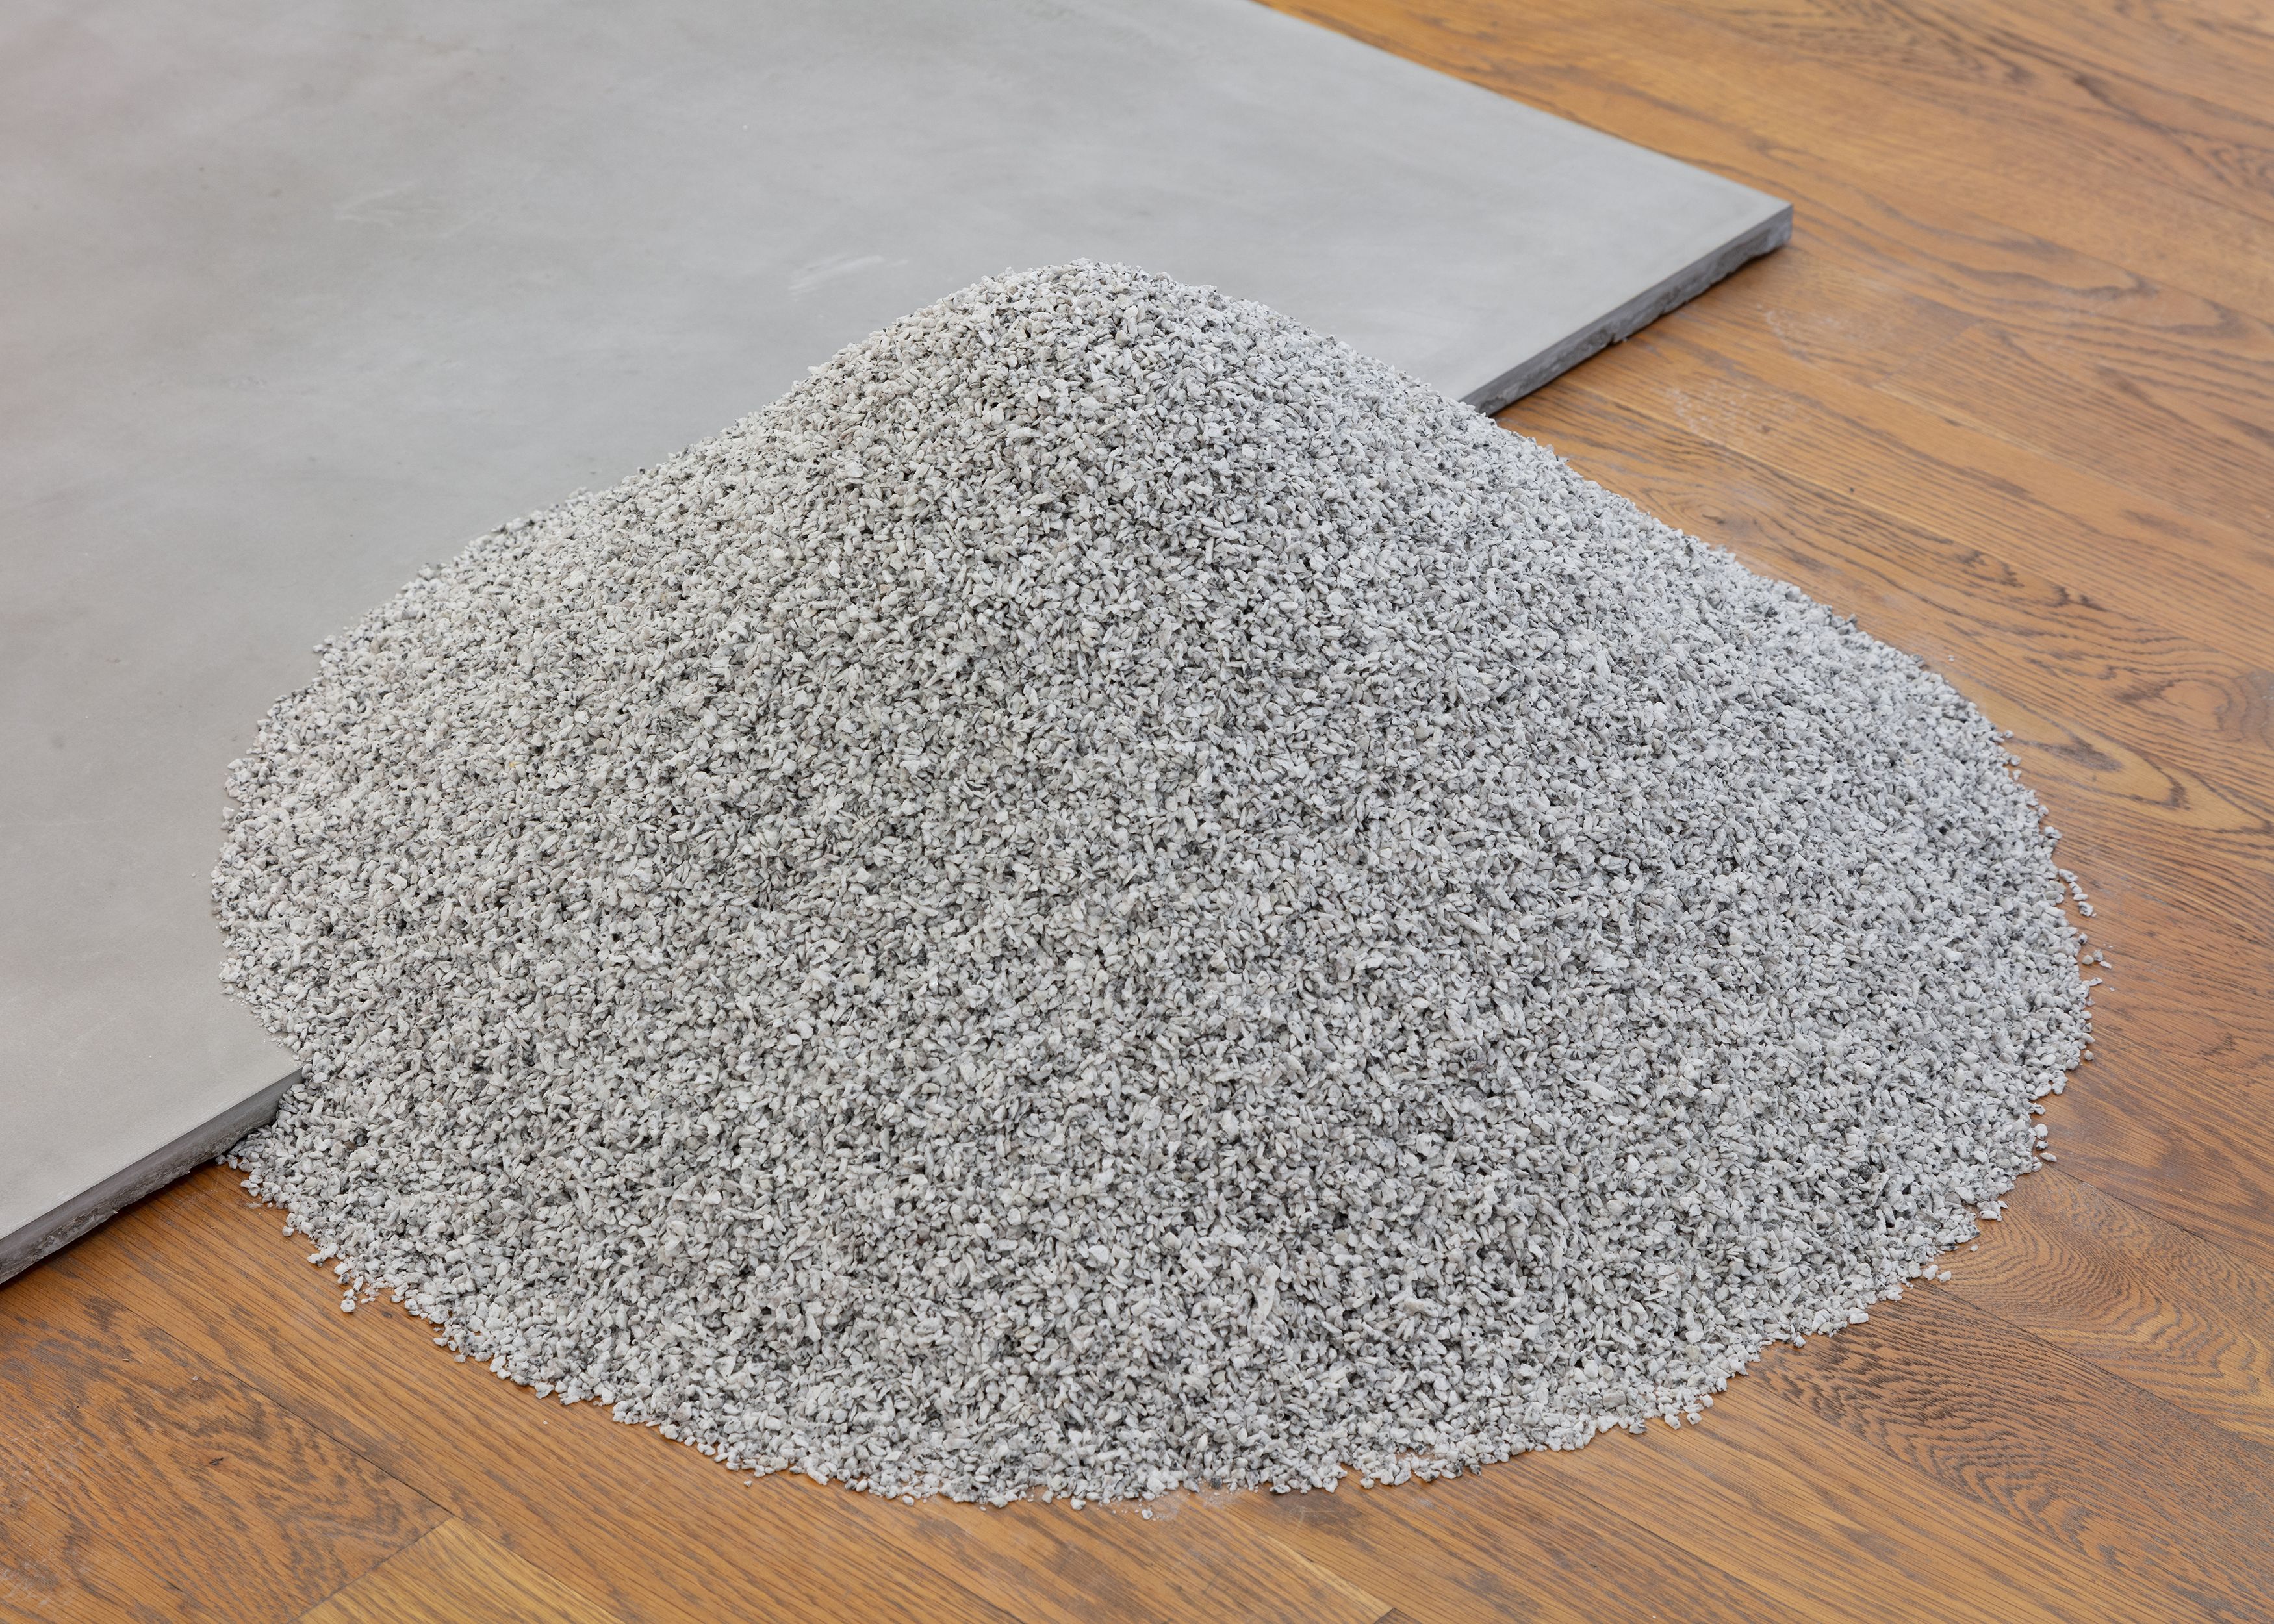 Stephen Lichty, Repose 4, 2021, concrete and crushed granite, 12 x 66 x 77 in. (30.48 x 167.64 x 195.58 cm)